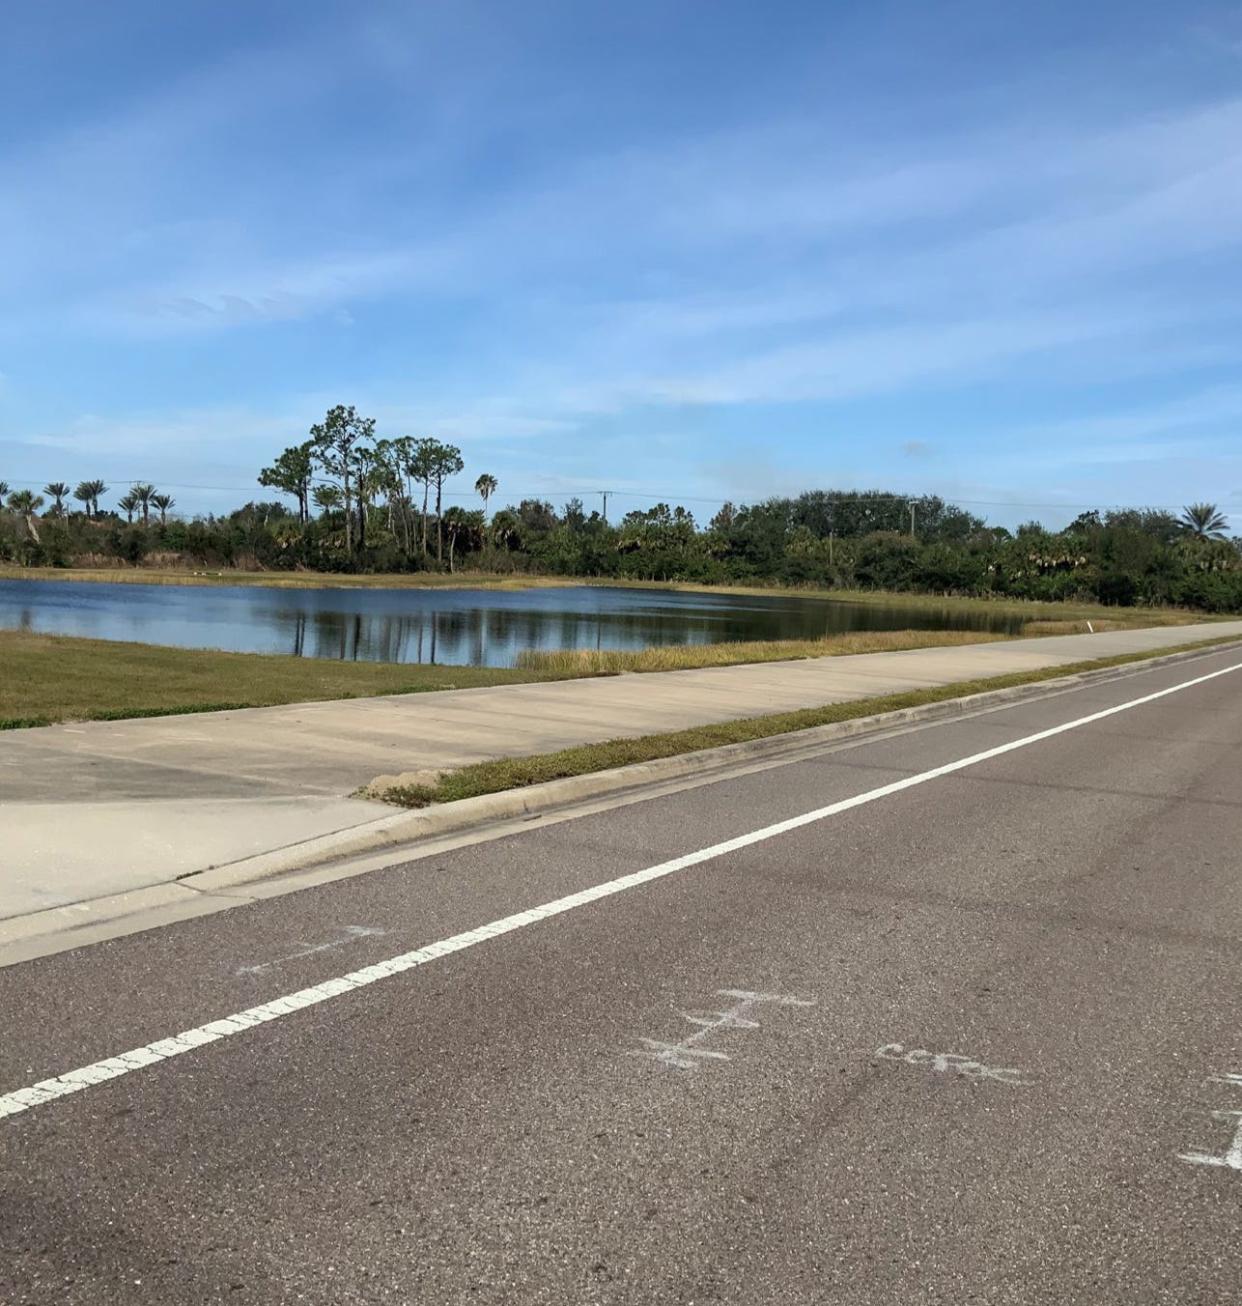 The view from Jacaranda Boulevard facing northwest to Laurel Road includes a wetland that would be developed, with the loss offset by credits purchased from the Myakka River Mitigation Bank if the site is replaced by a Publix-anchored shopping center, The Village at Laurel and Jacaranda.